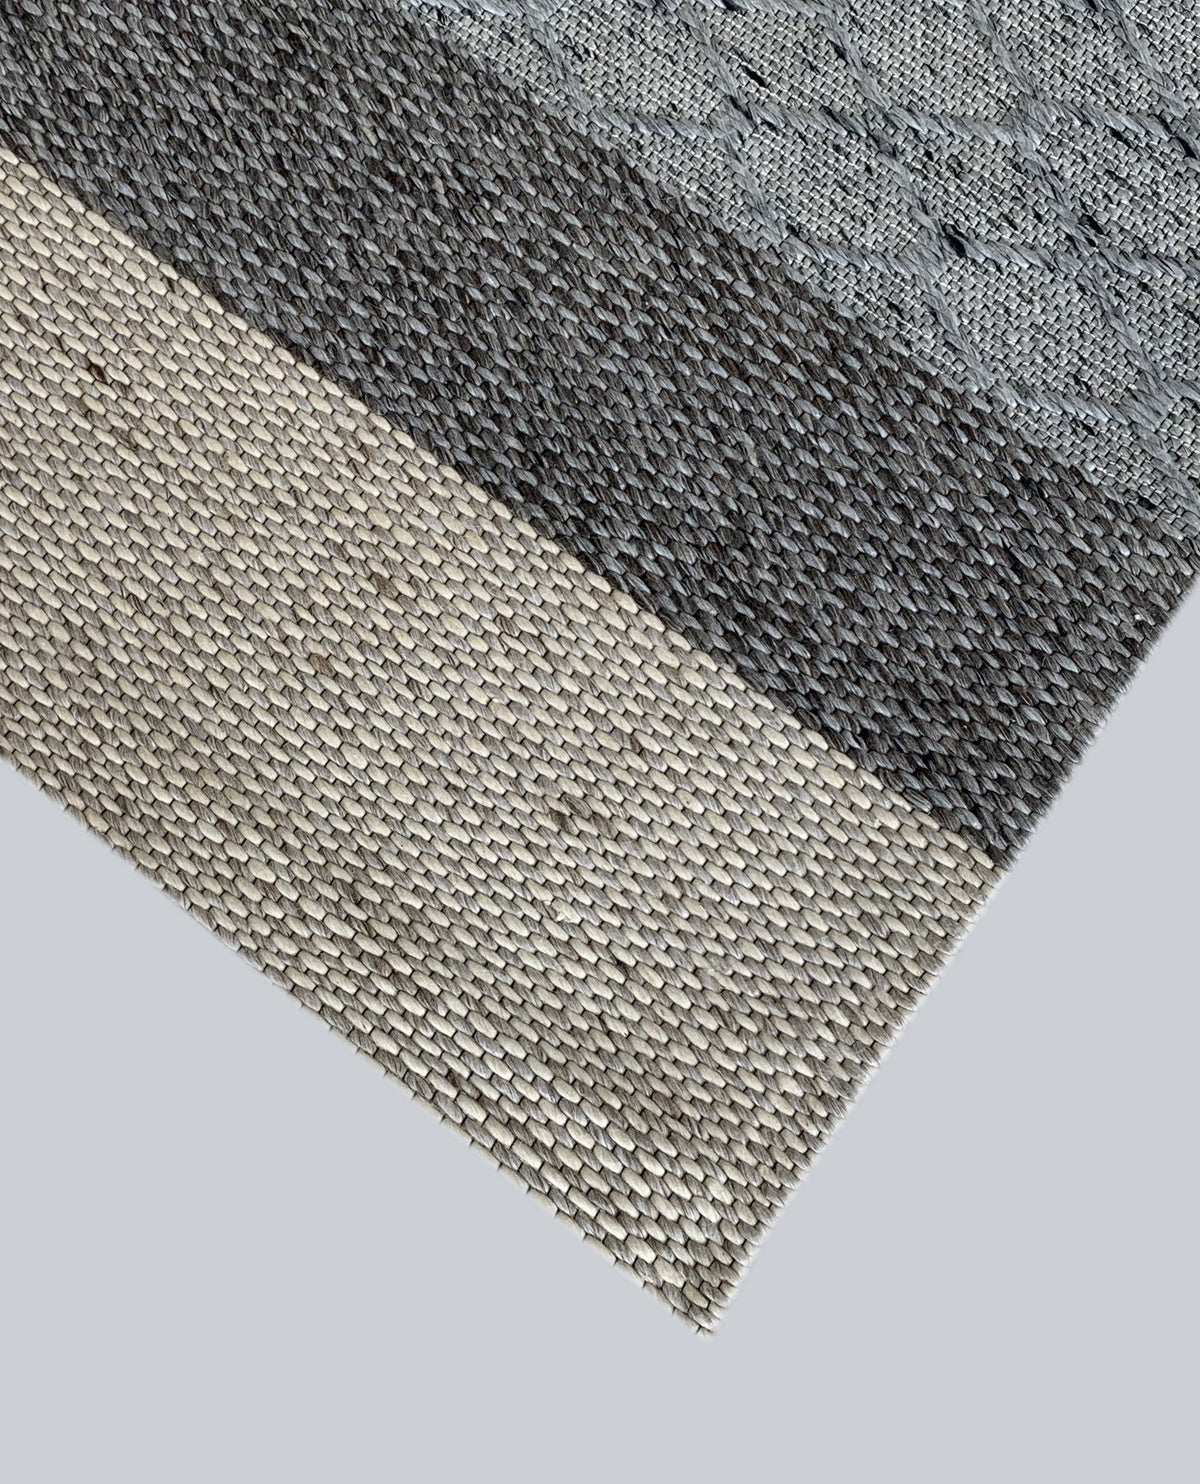 Rugslane Silver /grey Thick Felted Yarn Hand Woven Textured Plain Carpet 5ft X 8ft